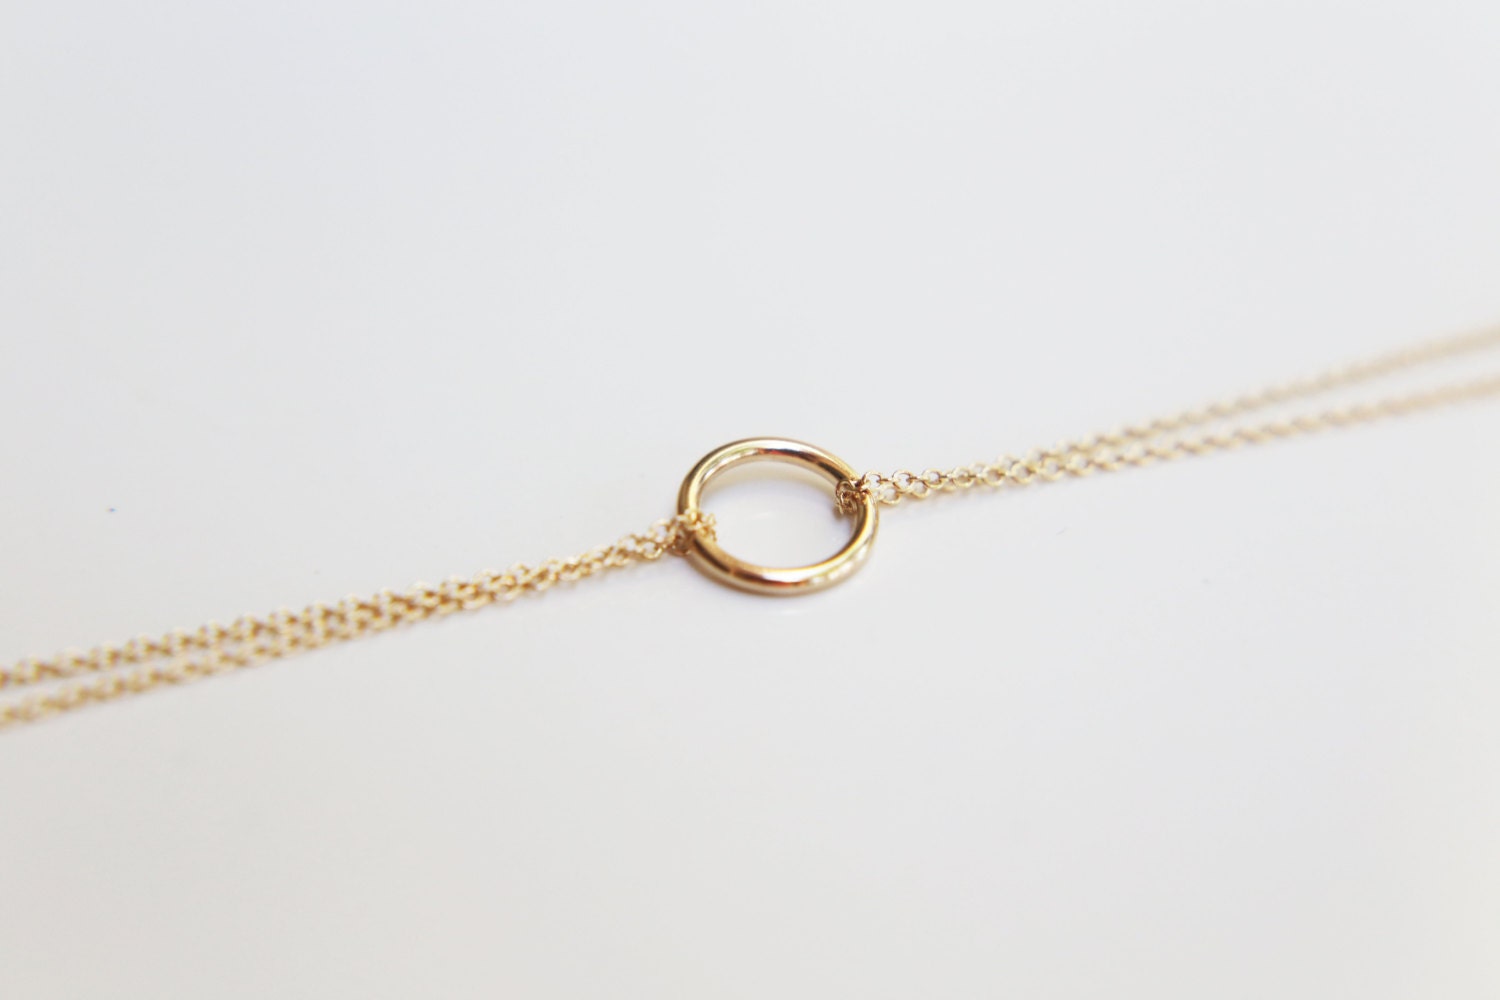 Halo Double Chain Bracelet Gold Filled and Sterling Silver - Etsy